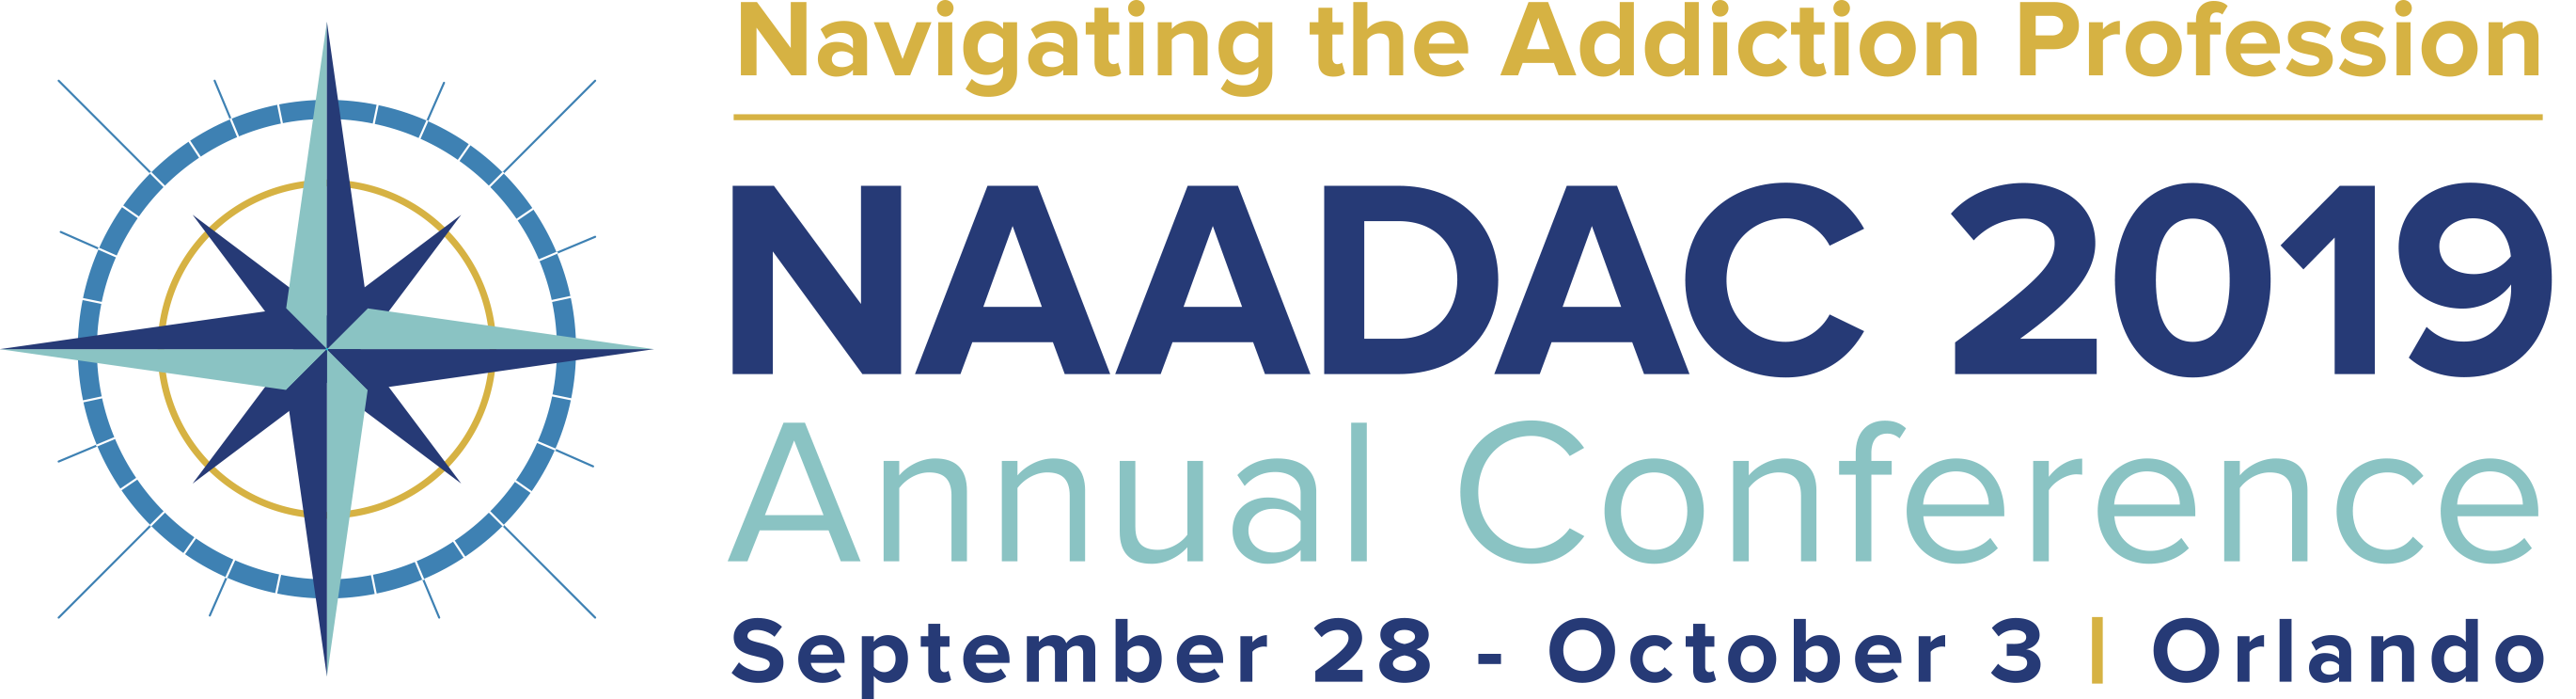 naadac conference 2019 Addiction Counselors Association